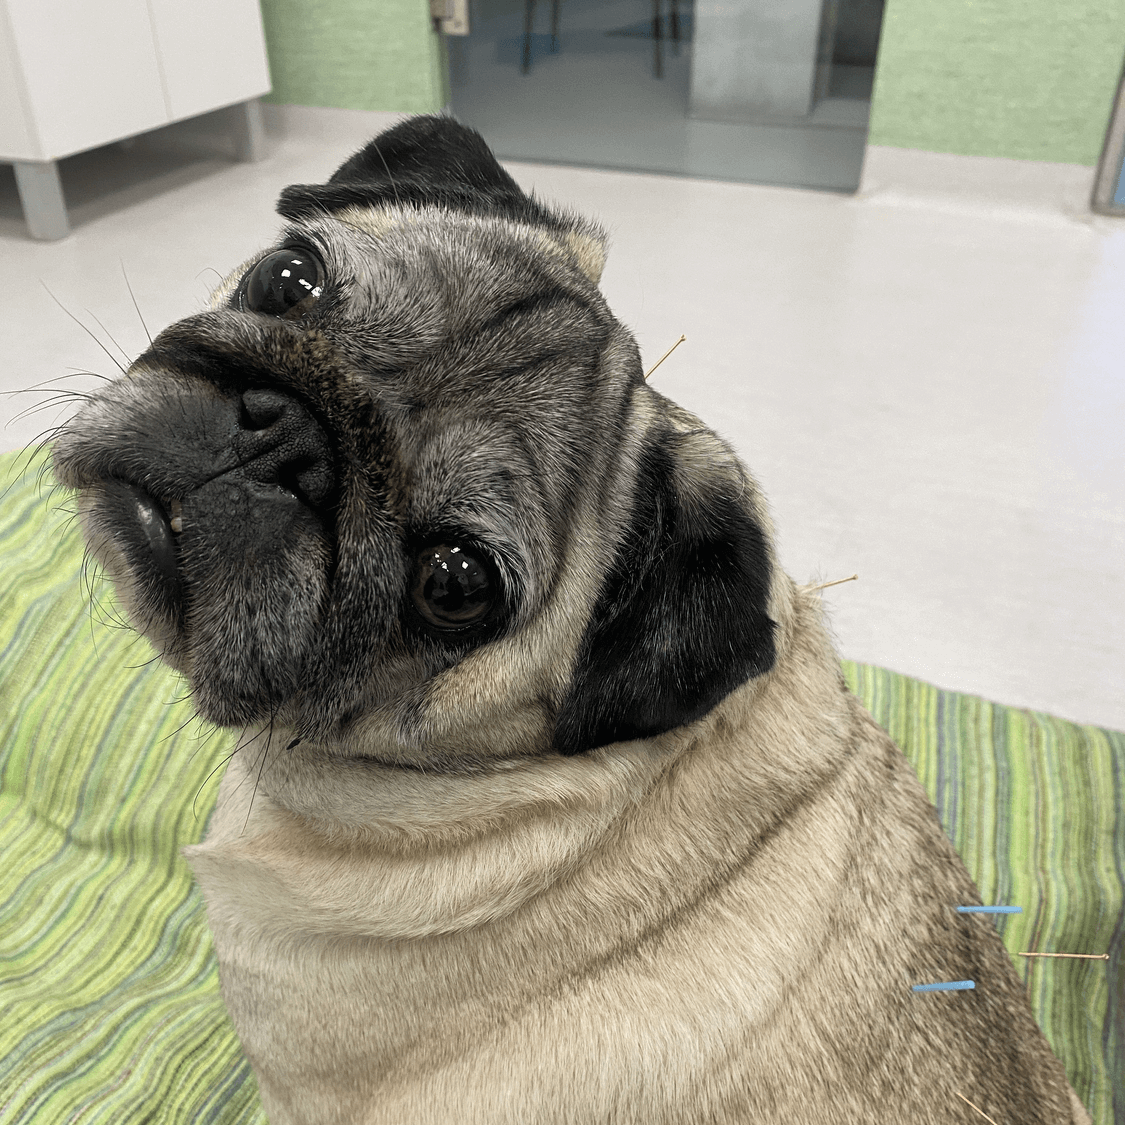 Pug Getting Acupuncture Treatment